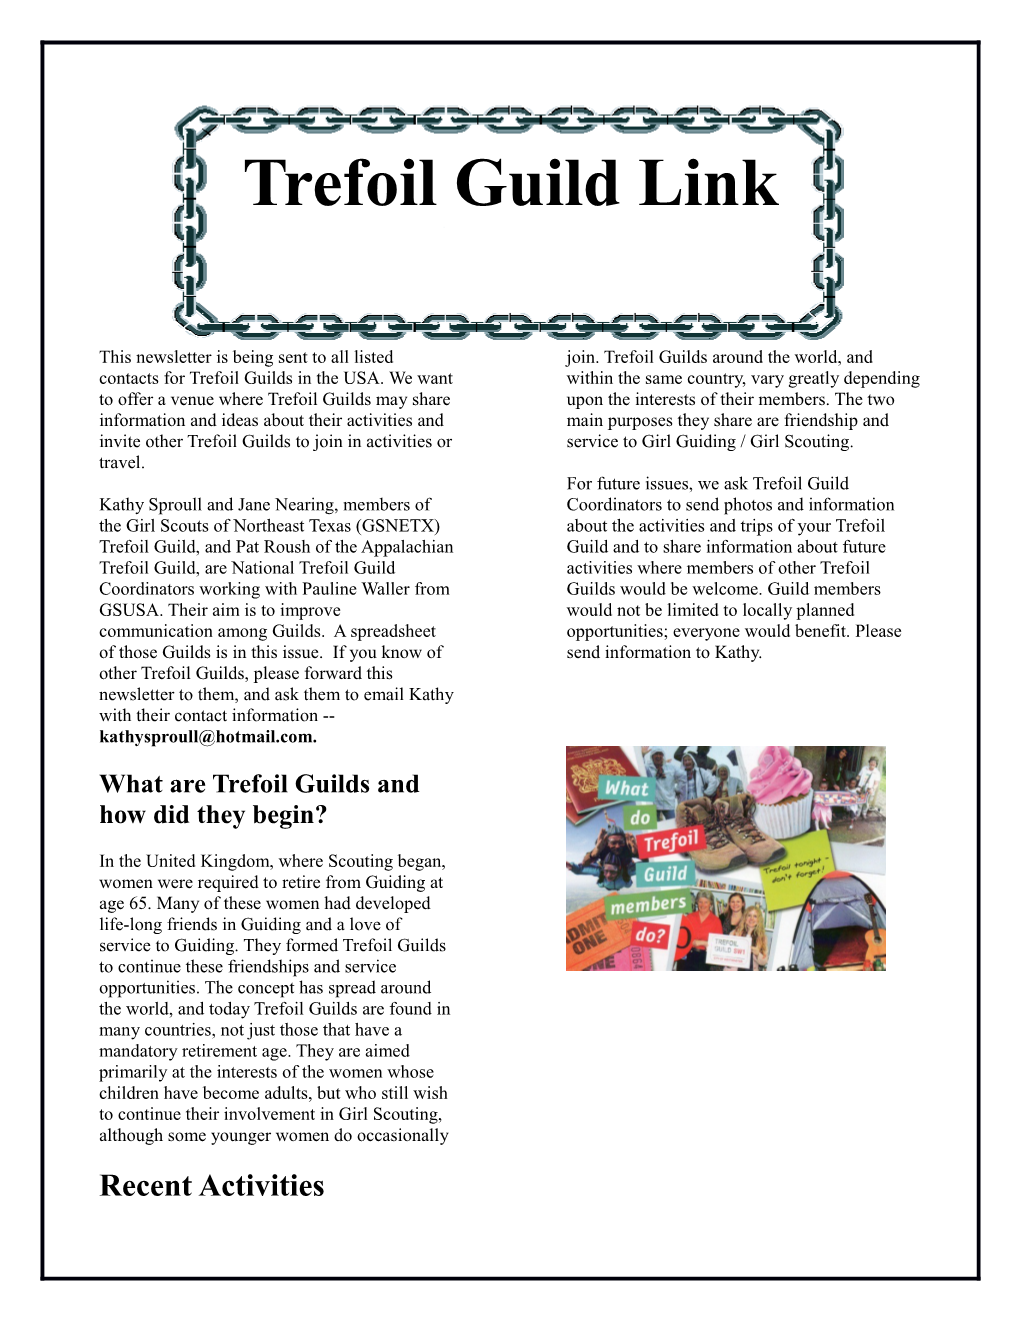 What Are Trefoil Guilds and How Did They Begin?